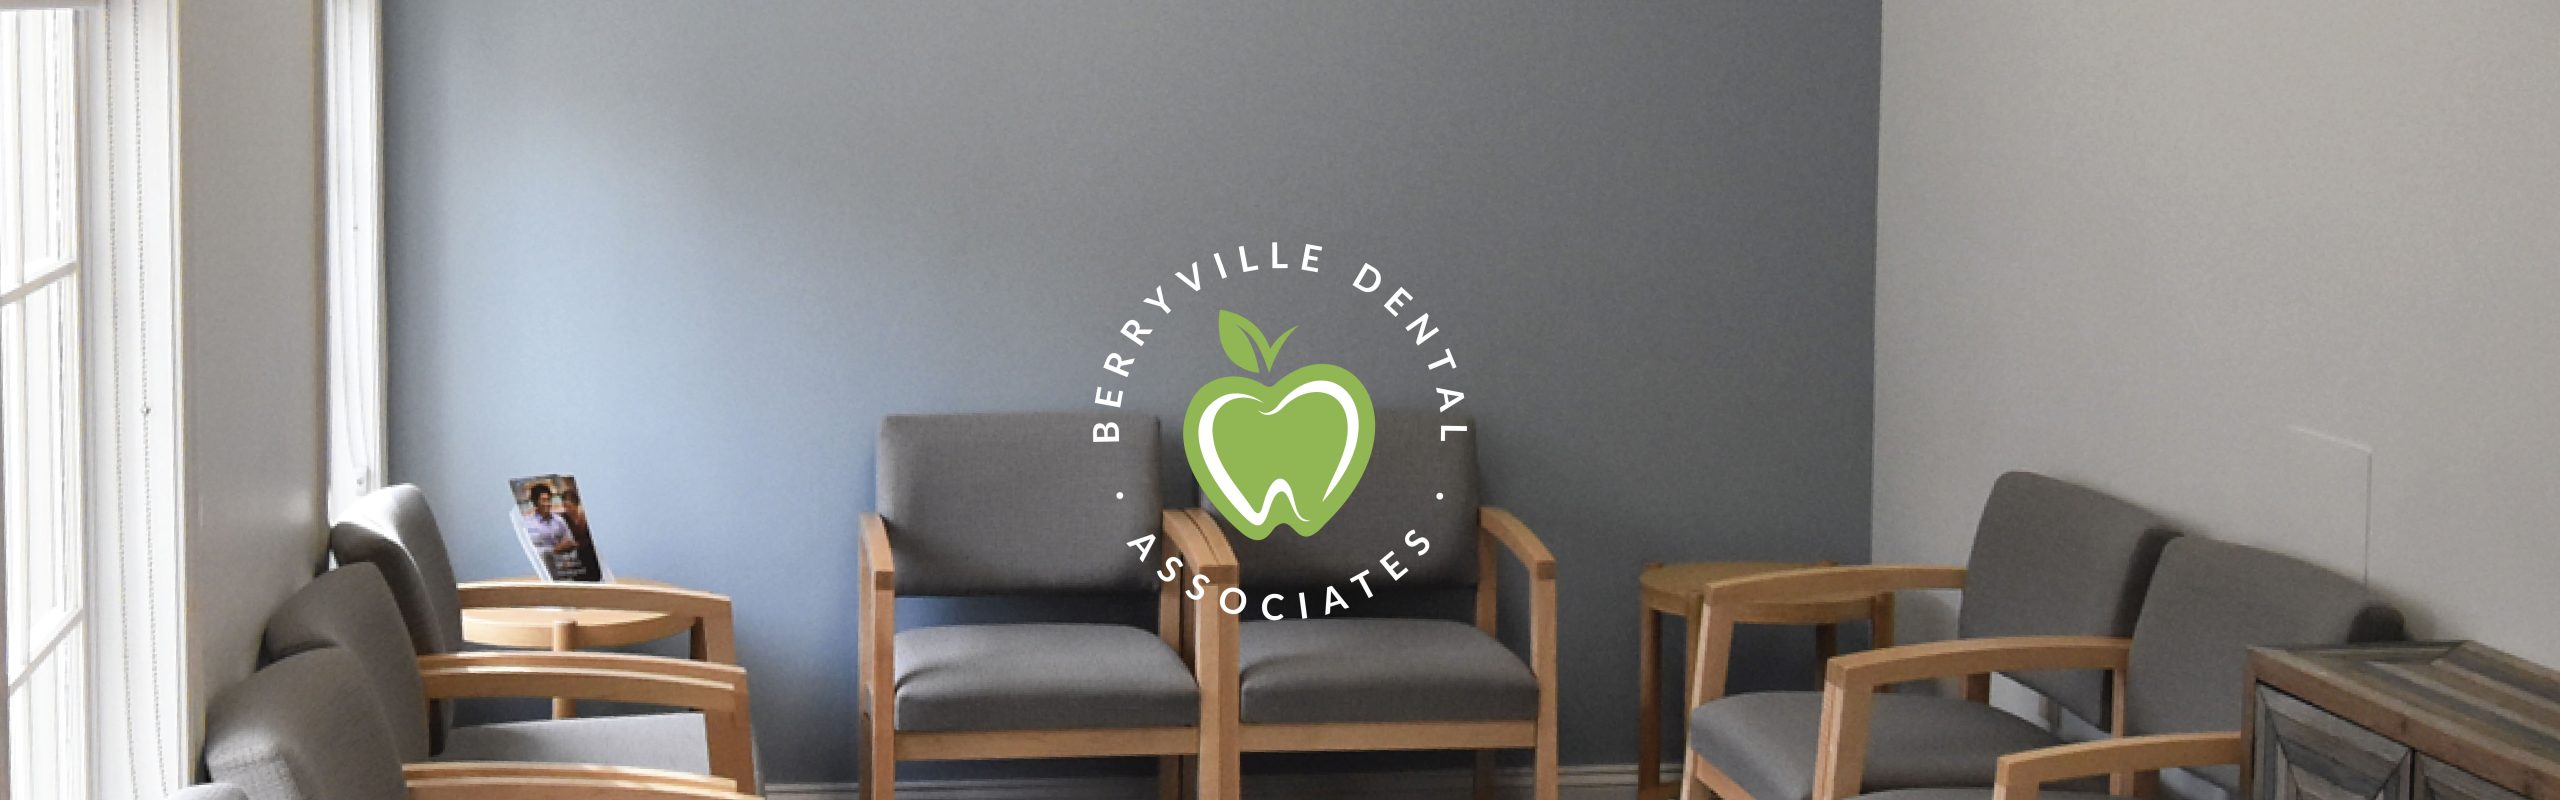 A tidy dental office waiting room with wooden chairs, a side table with magazines, and Berryville Dental Associates' sign on the wall.